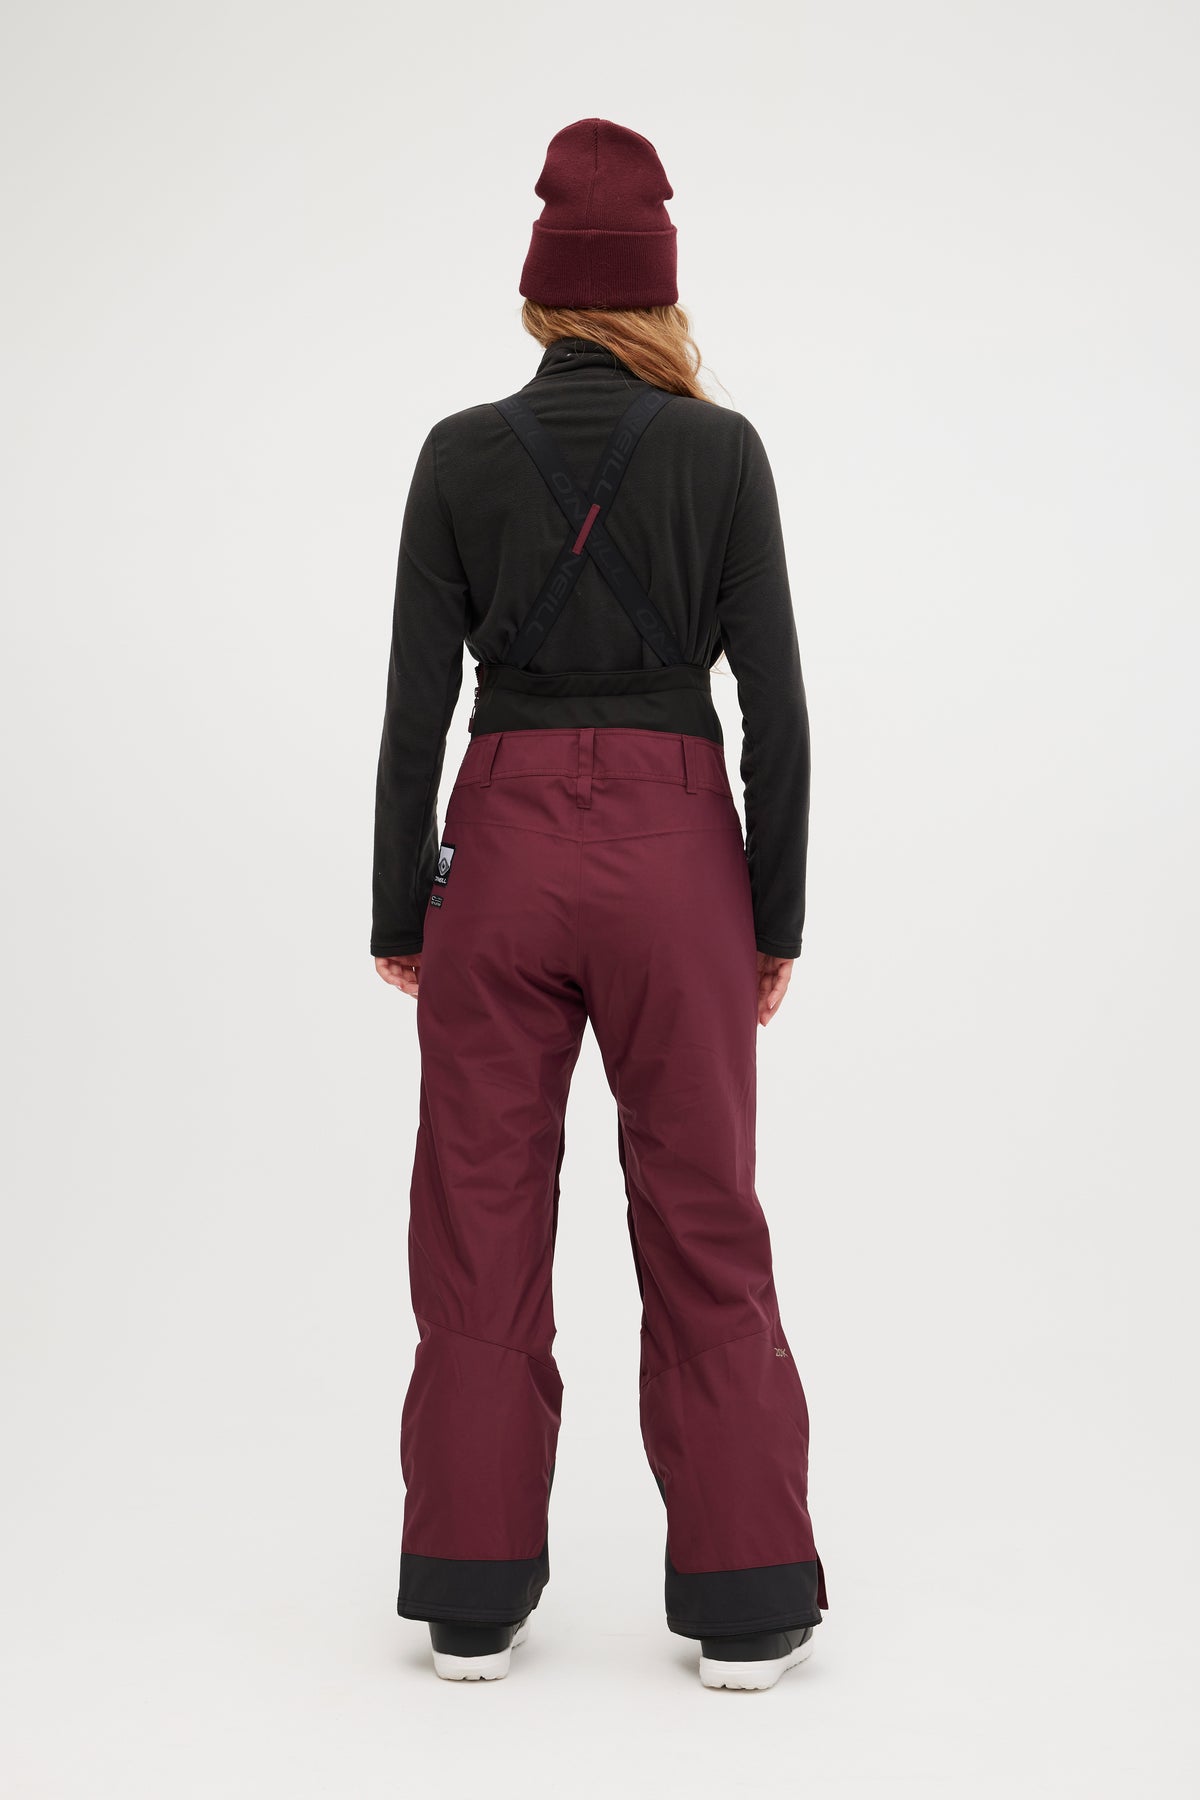 Ladies office wear pants  Stylish Workwear at Nils Store